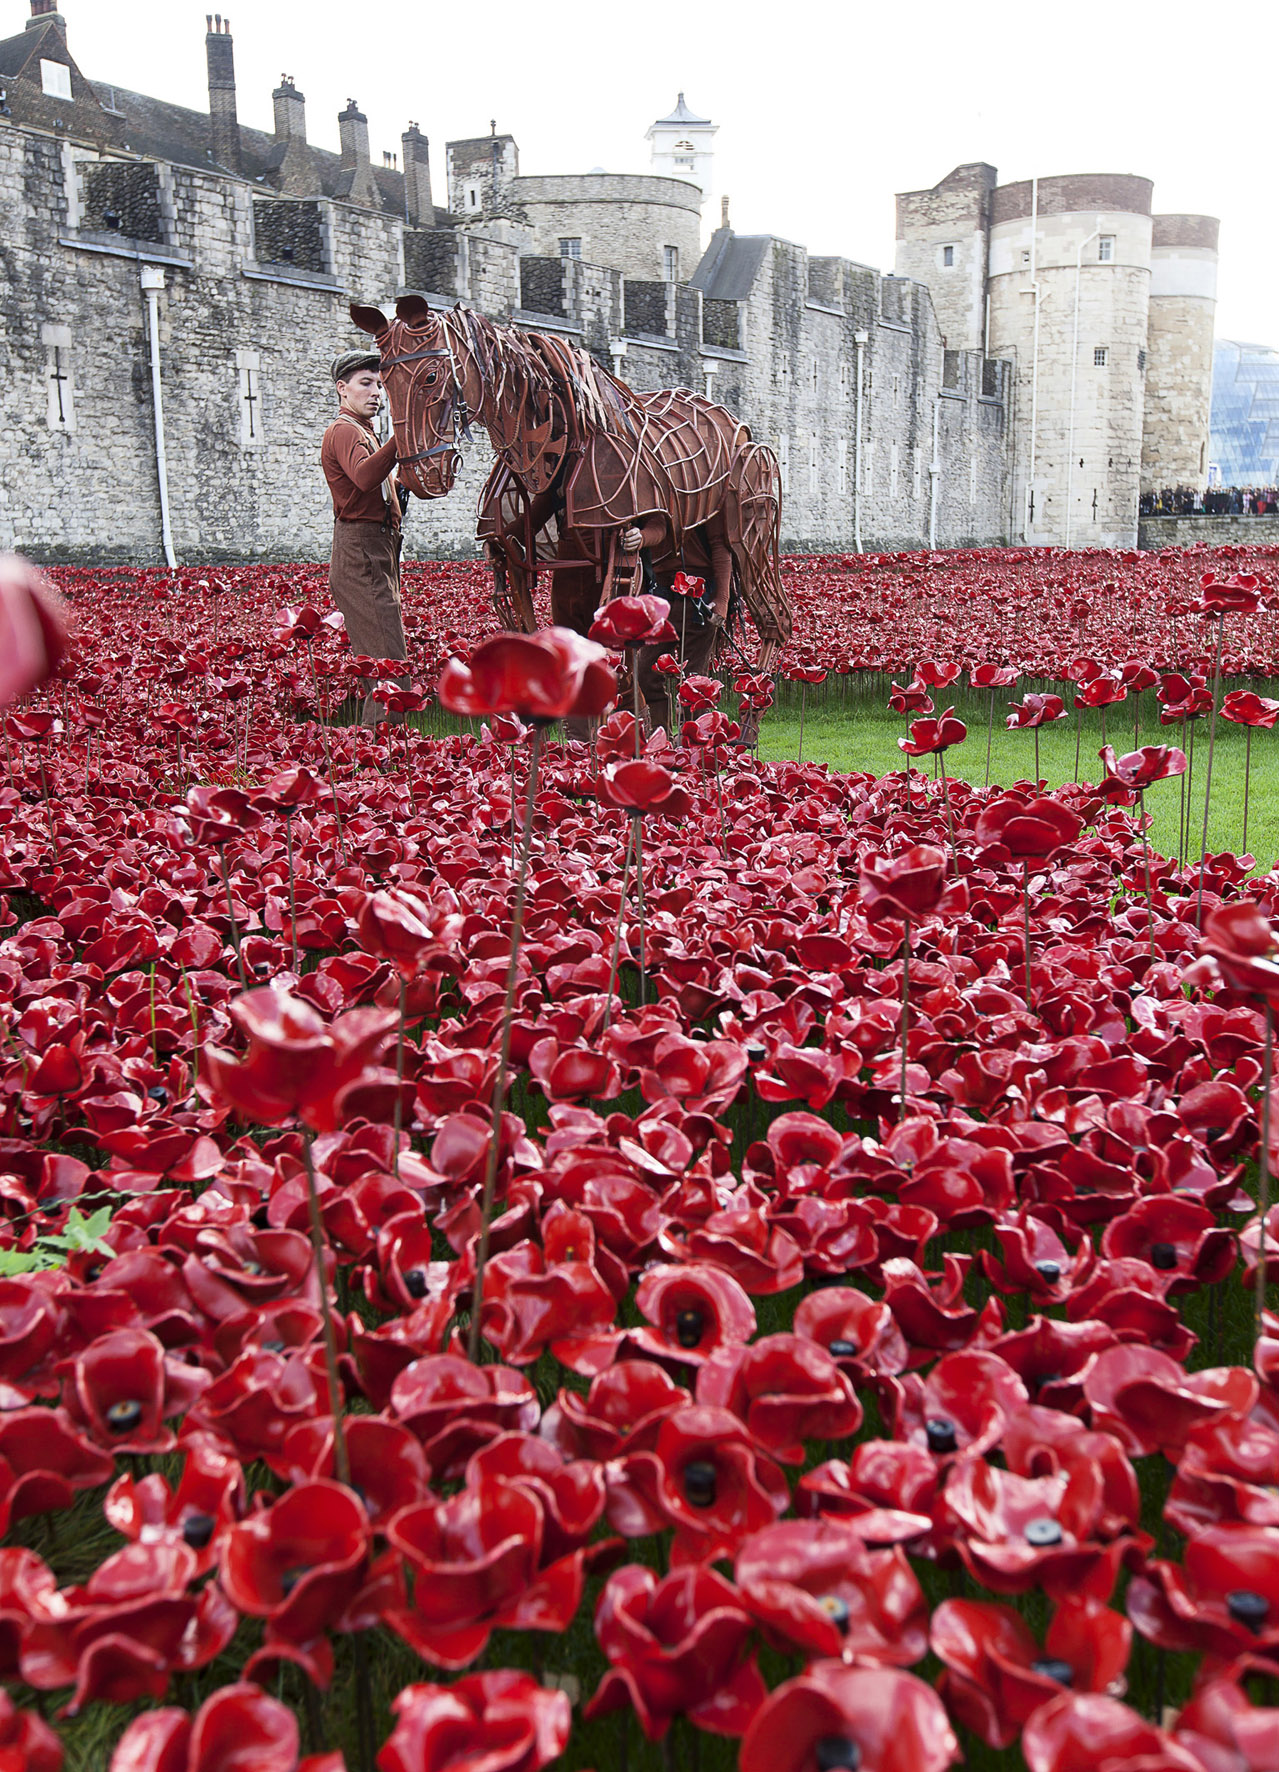 War Horse Joey visits the poppy installtion, "Blood swept lands and seas of red" at the Tower of London with writer Michael Morpurgo